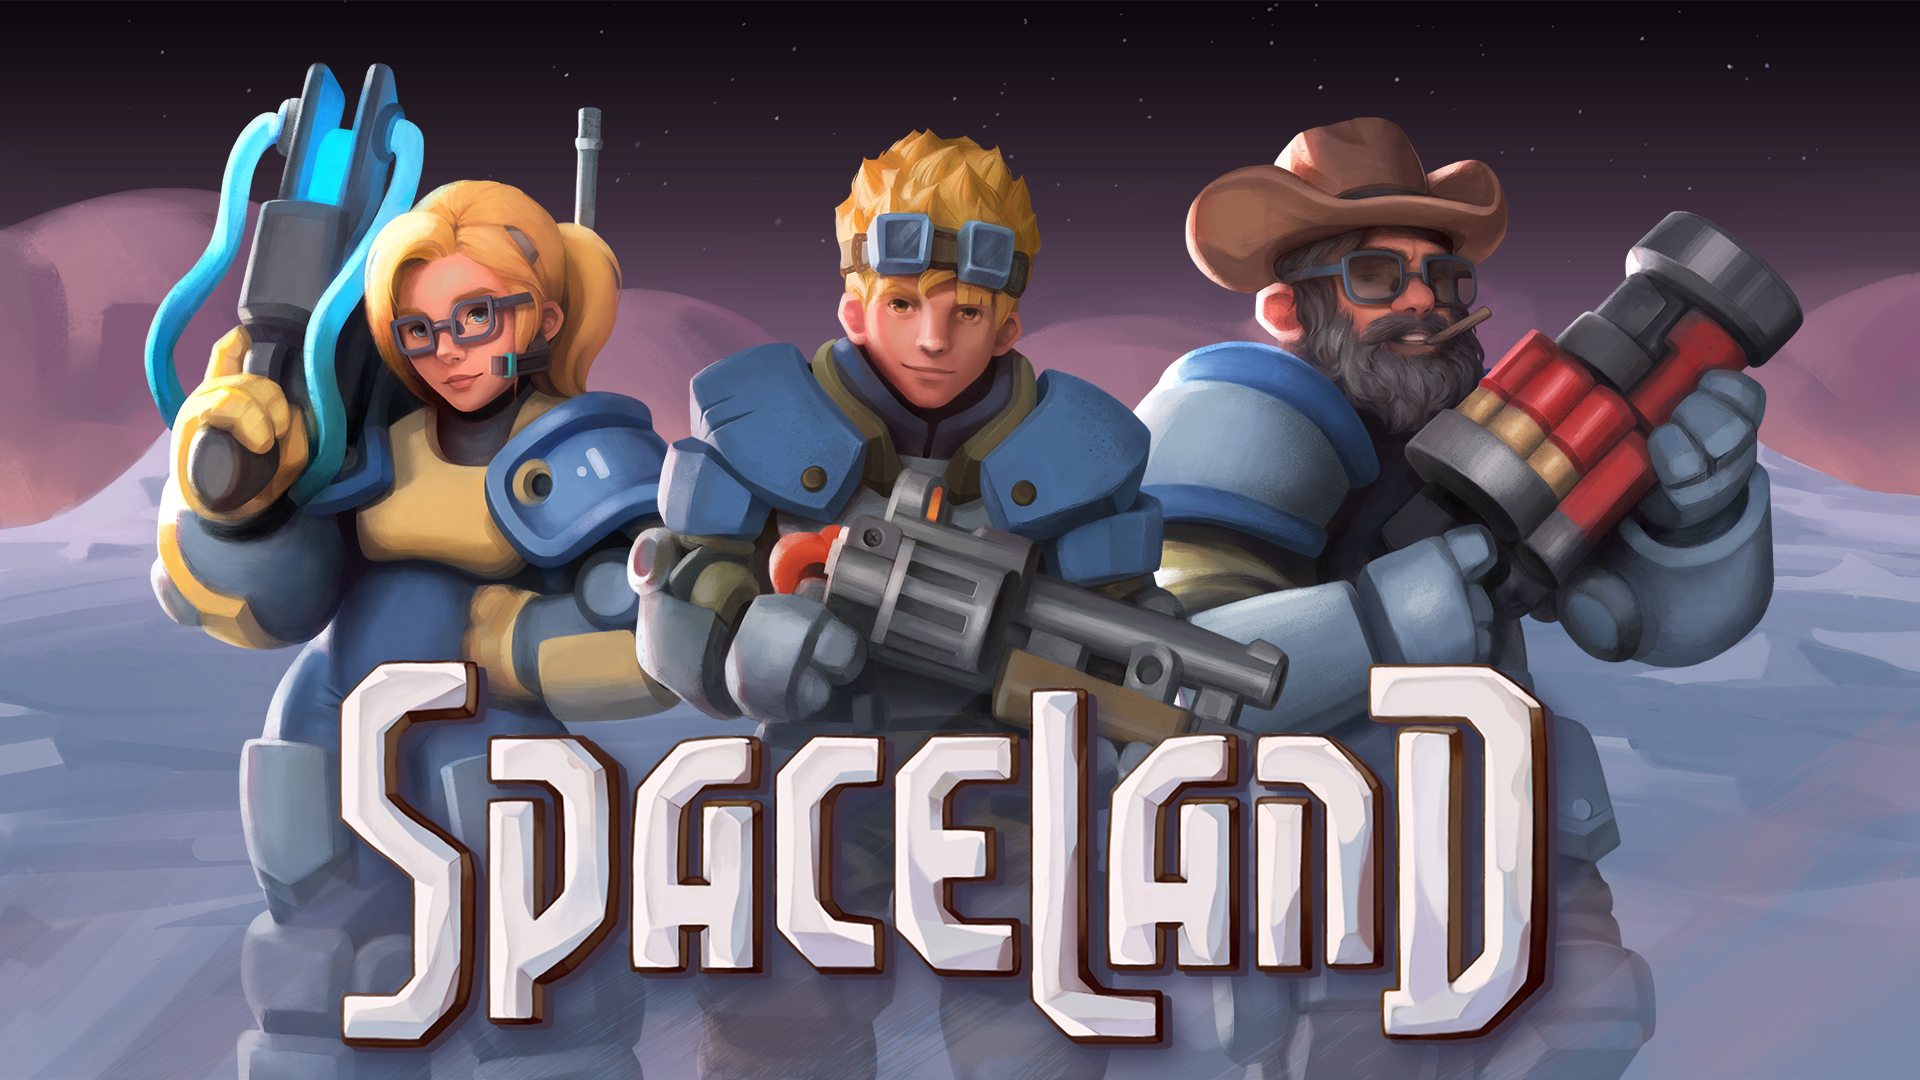 Spaceland seeing release for Switch in Japan on April 23rd